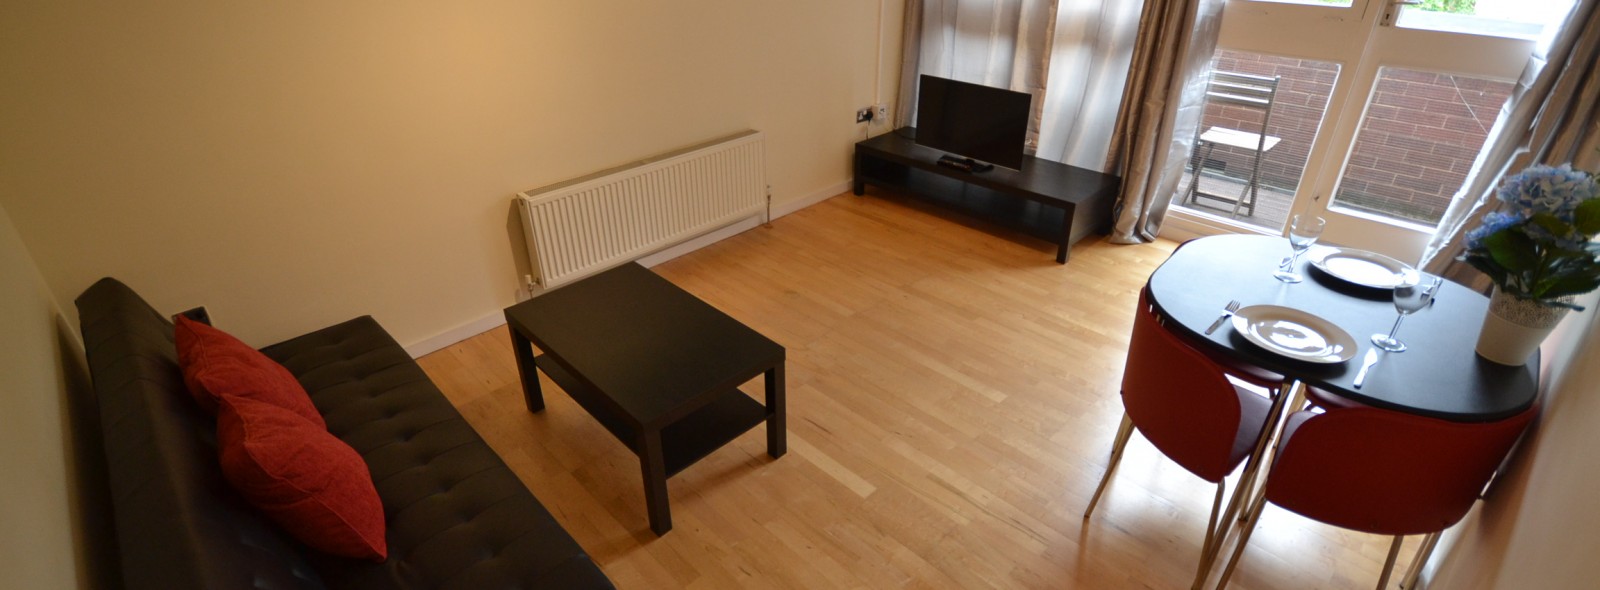 2-Bed Student Apartment – Carter Gate, City Centre